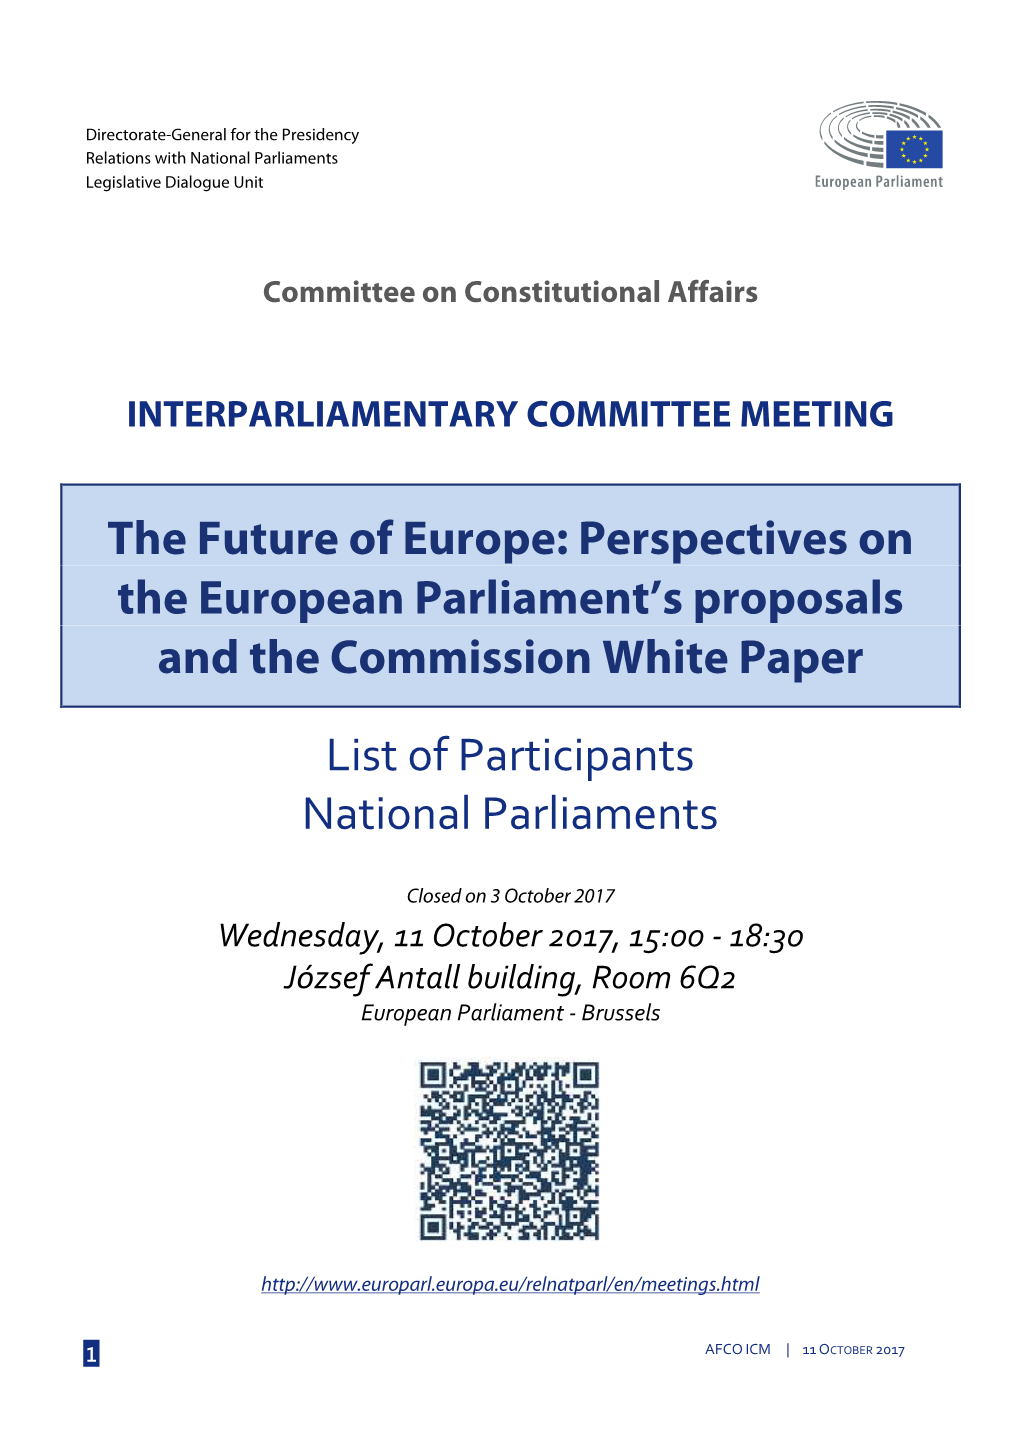 The Future of Europe: Perspectives on the European Parliament's Proposals and the Commission White Paper List of Participants